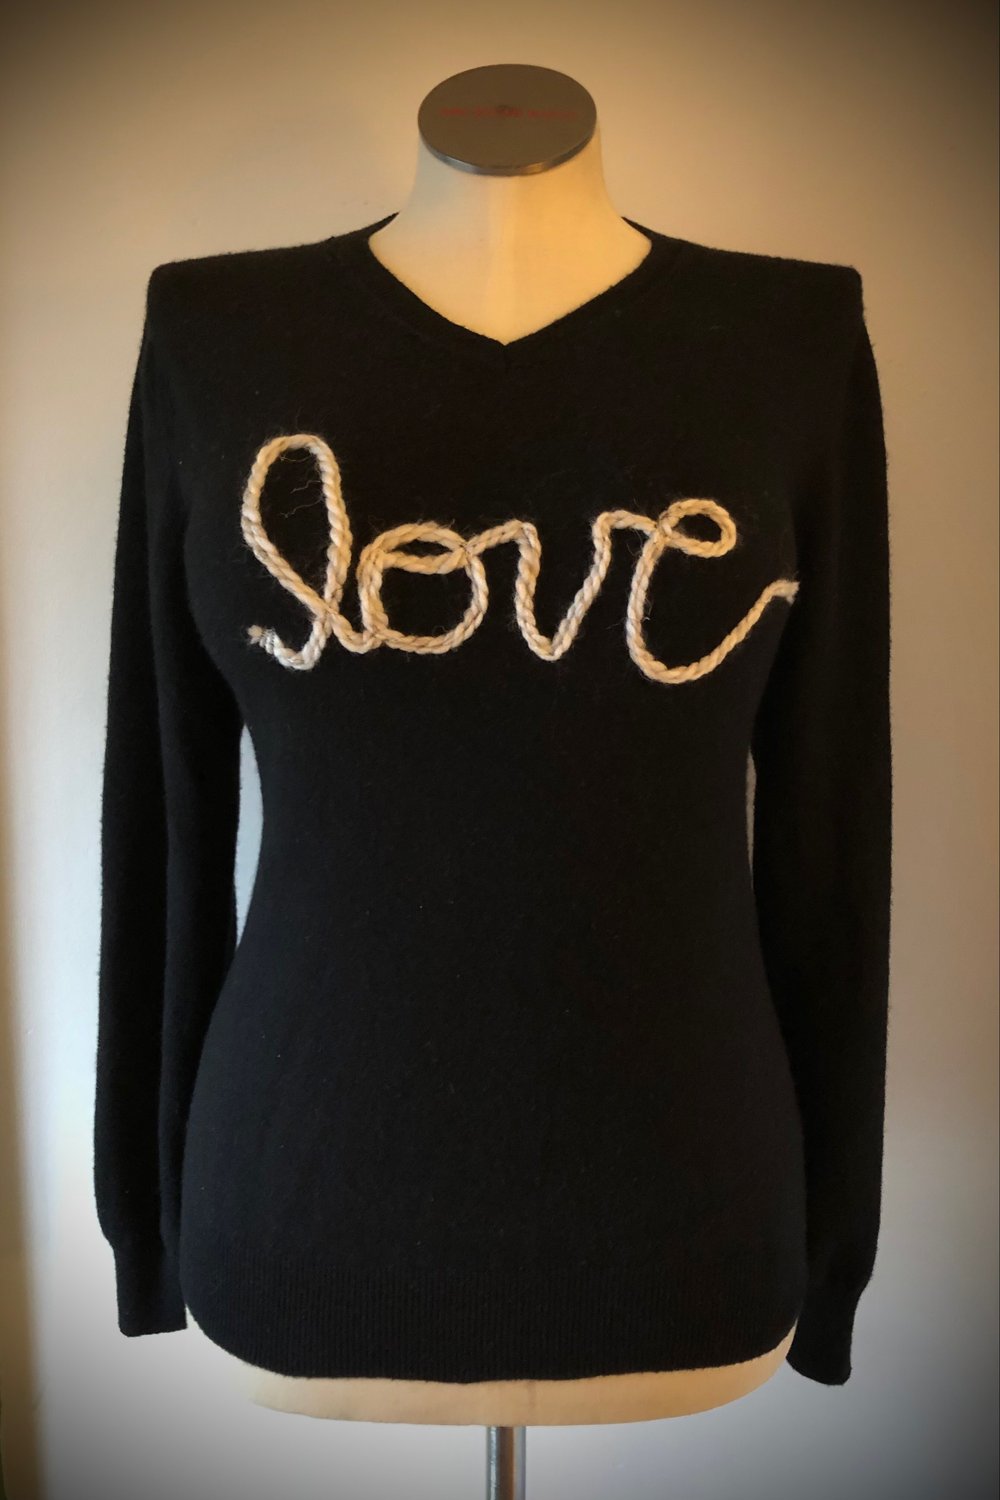 Upcycled “love” cursive yarn sweater in black